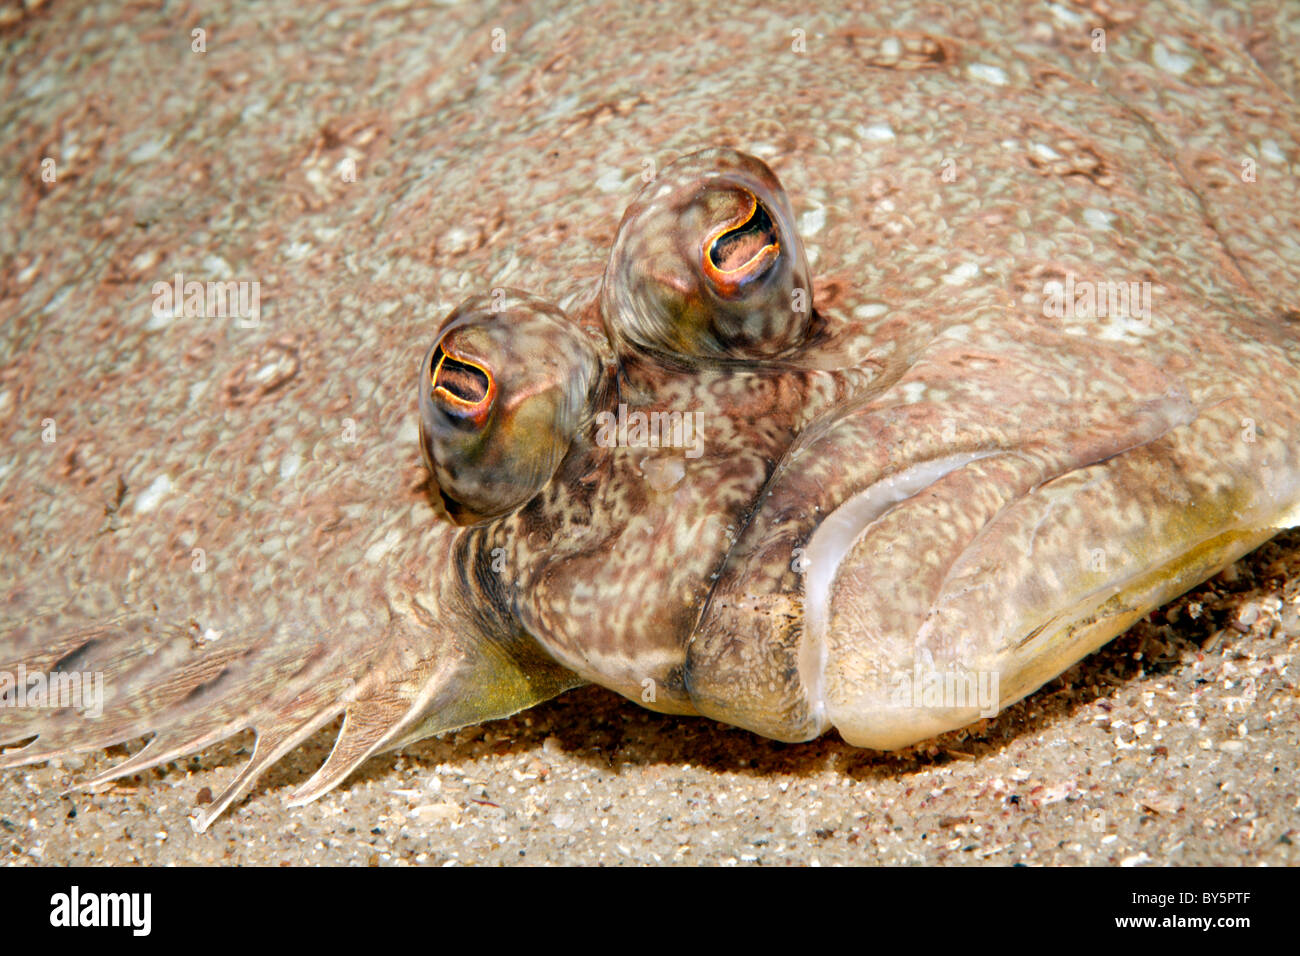 Face and head of the Small Tooth Flounder, Pseudorhombus jenynsii. Stock Photo